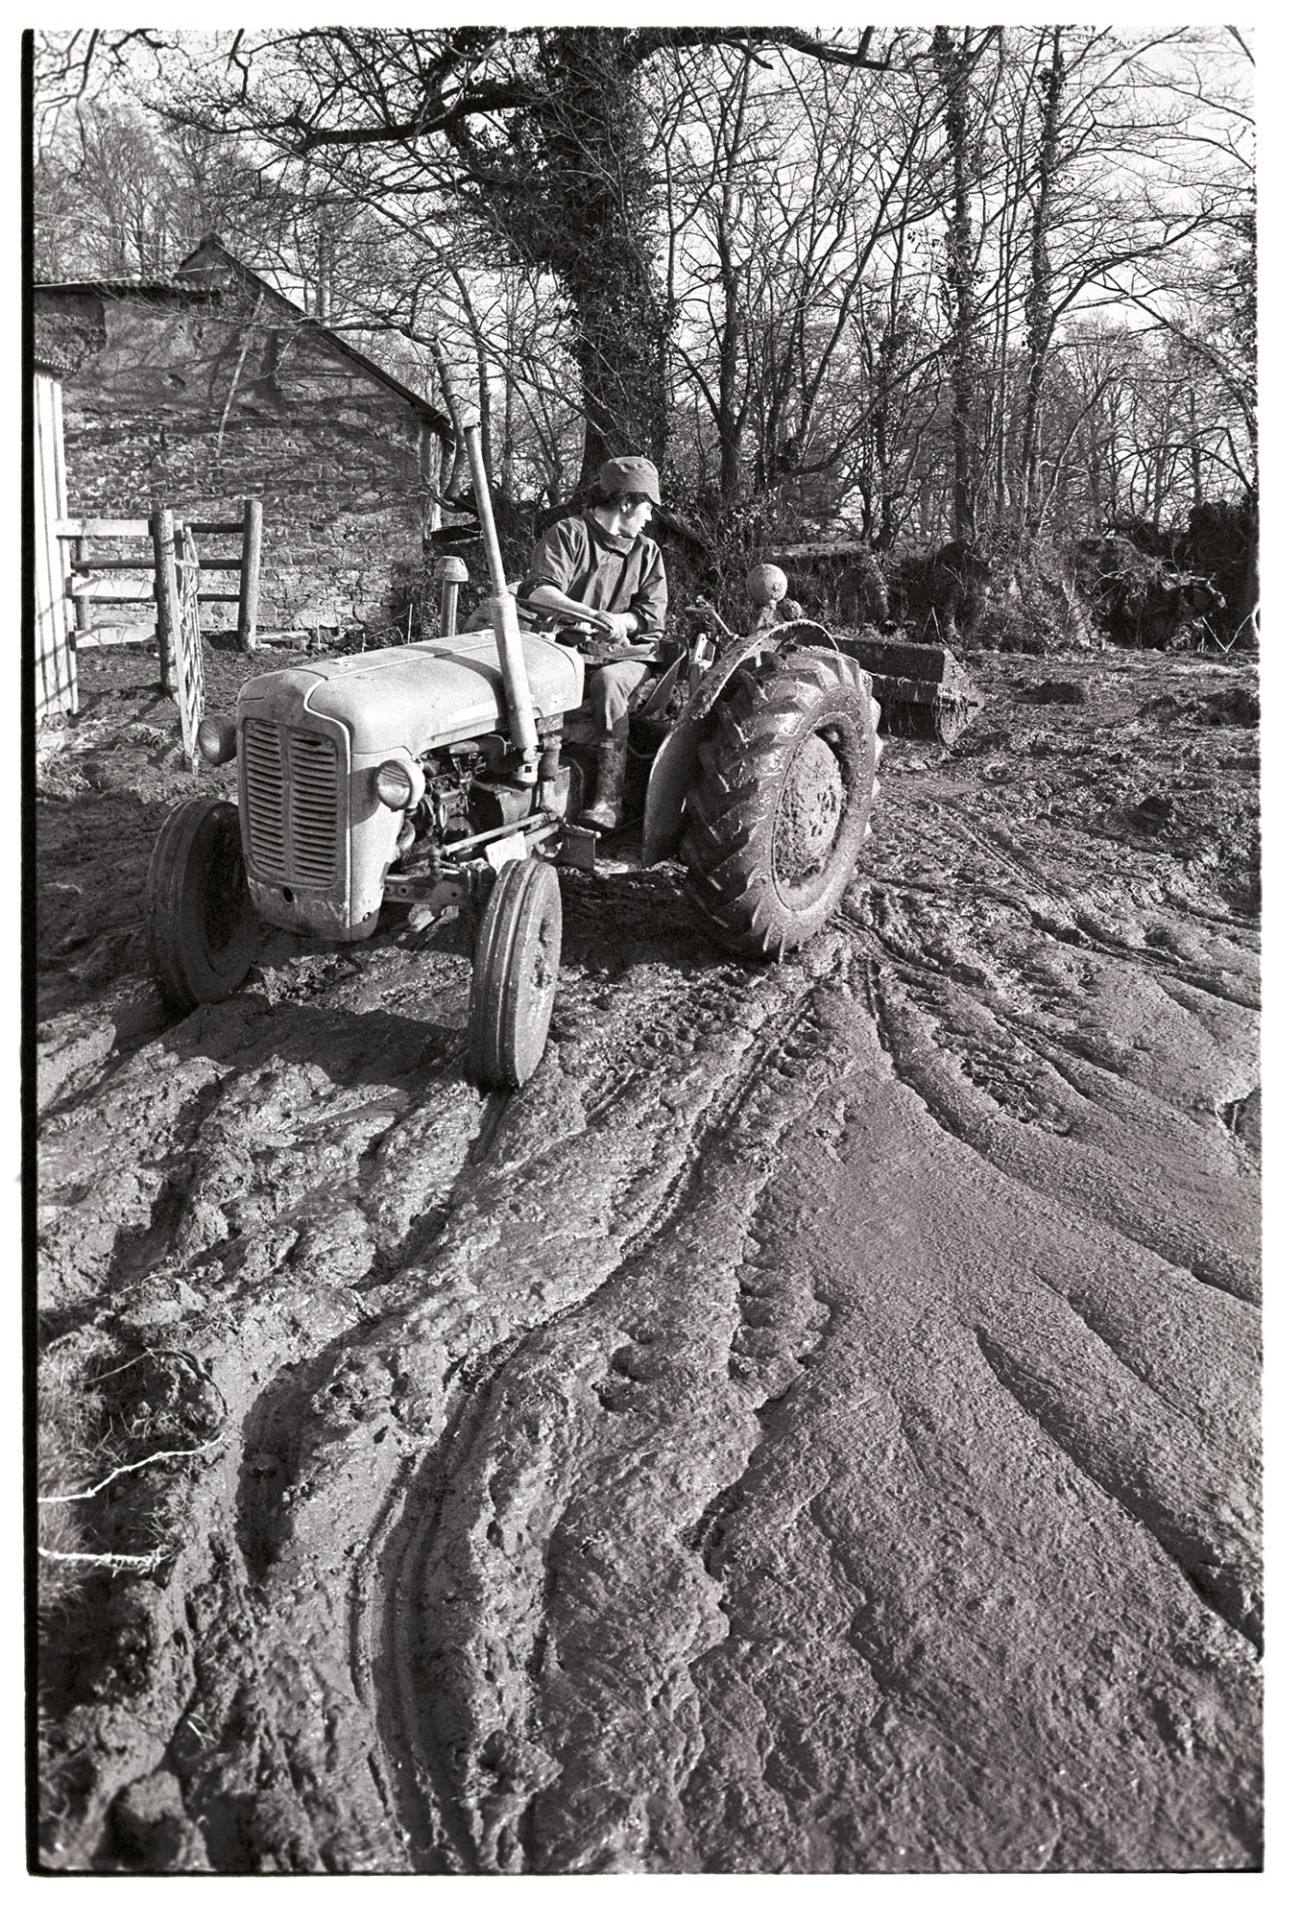 Tractor and scraper in muck.
[David Ward driving a tractor and scraping slurry in a field at Nethercott, Iddesleigh.]